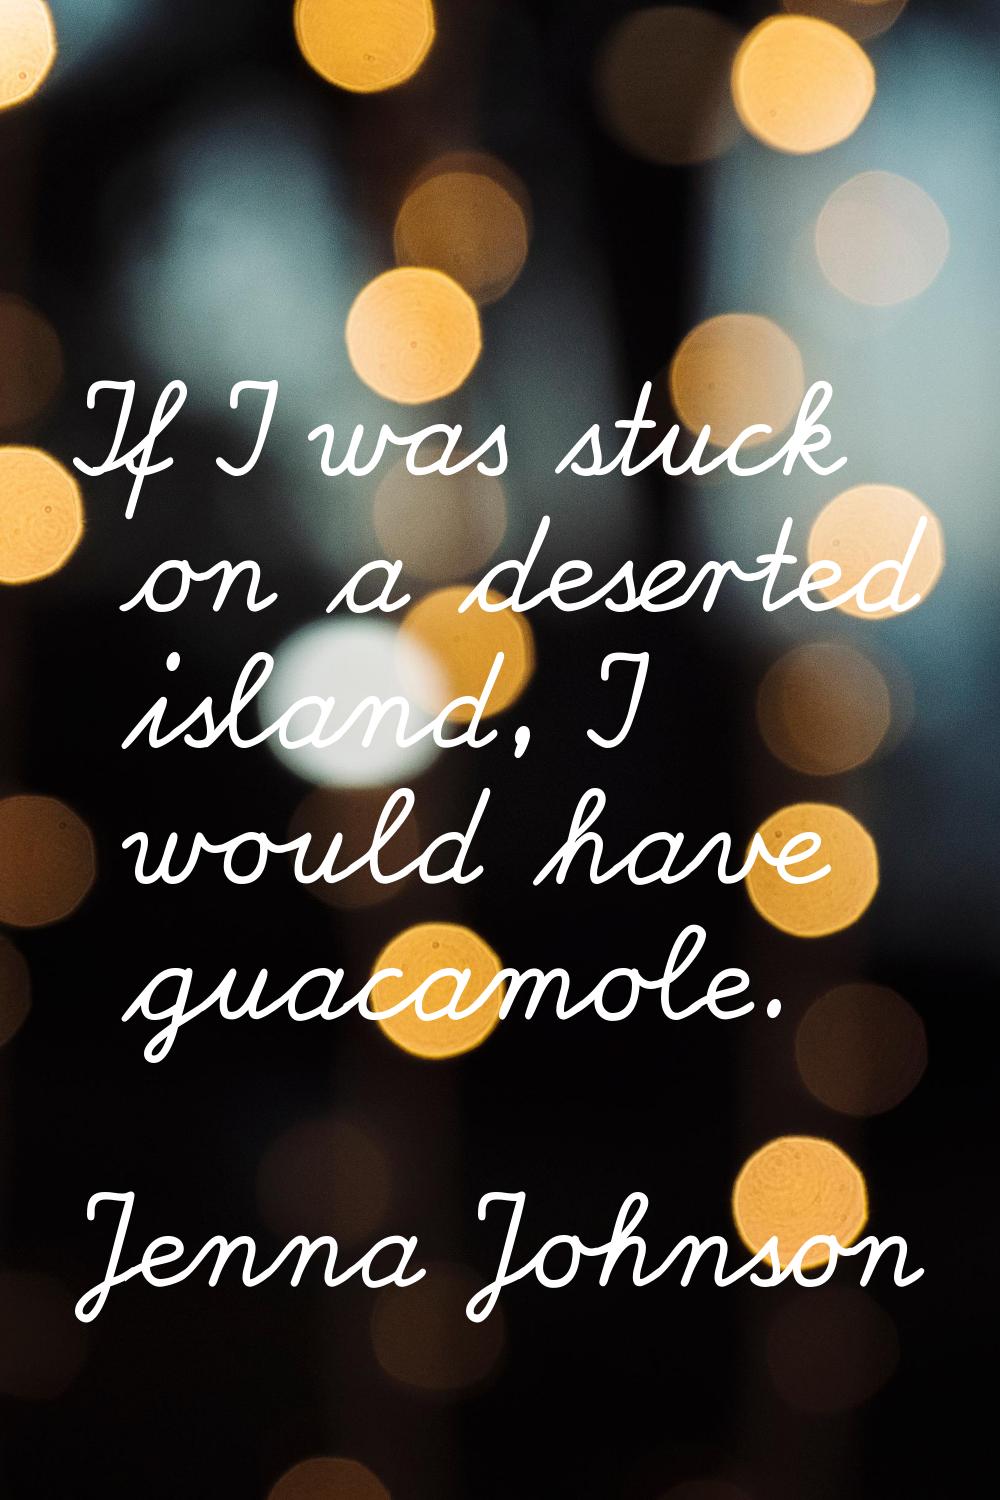 If I was stuck on a deserted island, I would have guacamole.